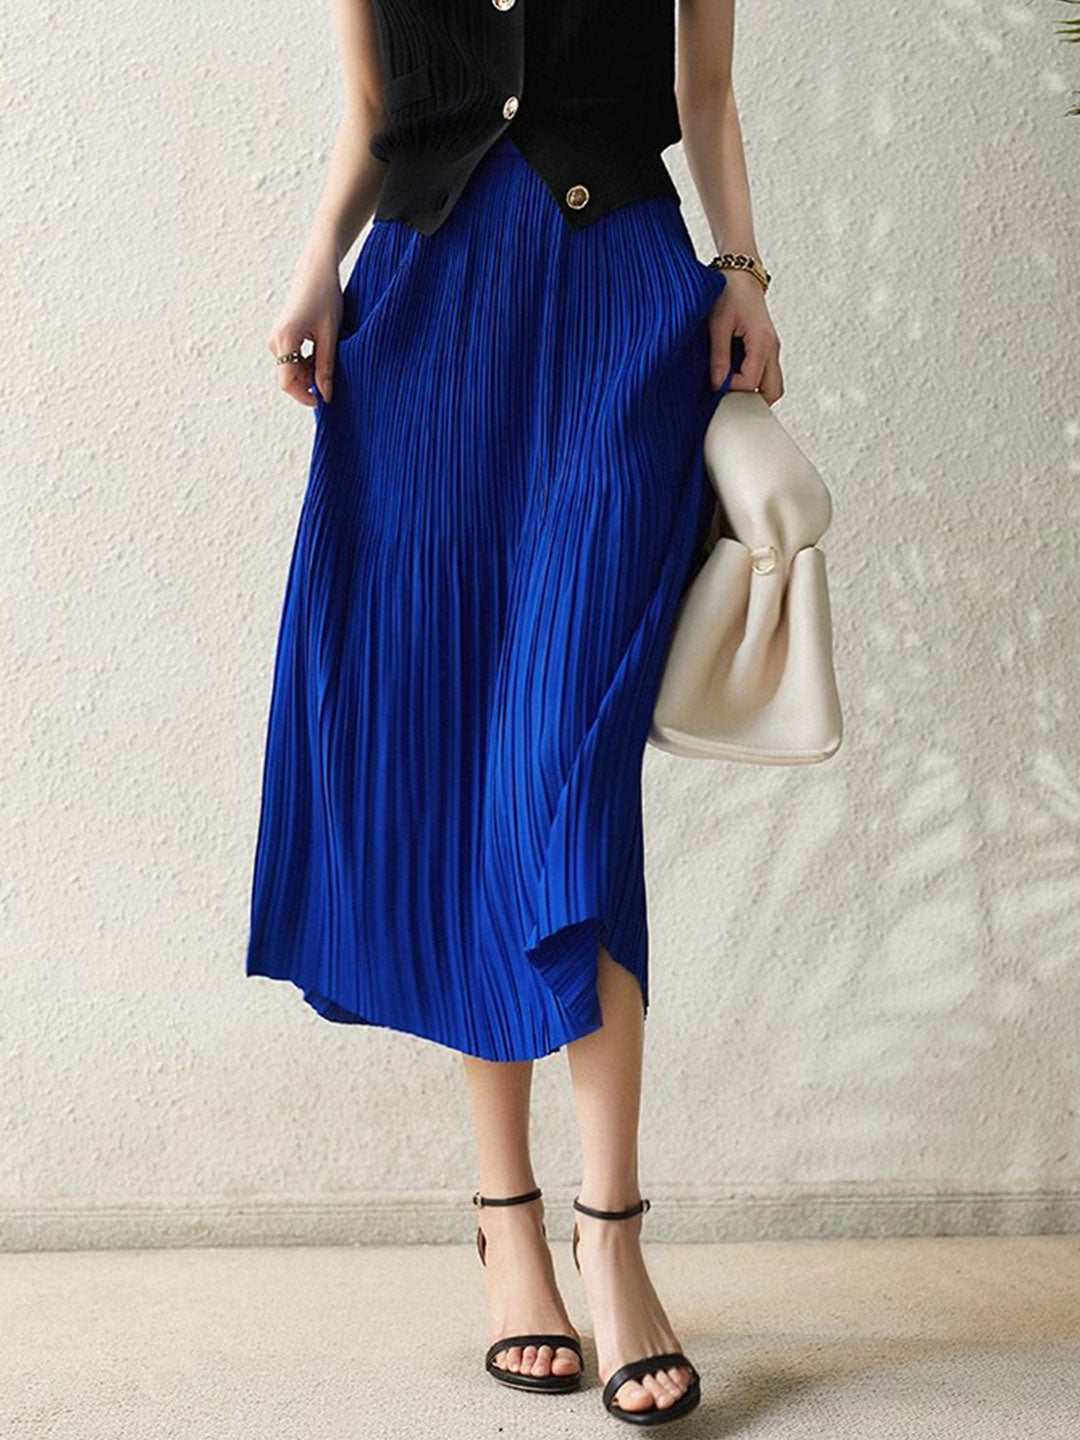 Taylor Daily Paneled Pleated Skirt